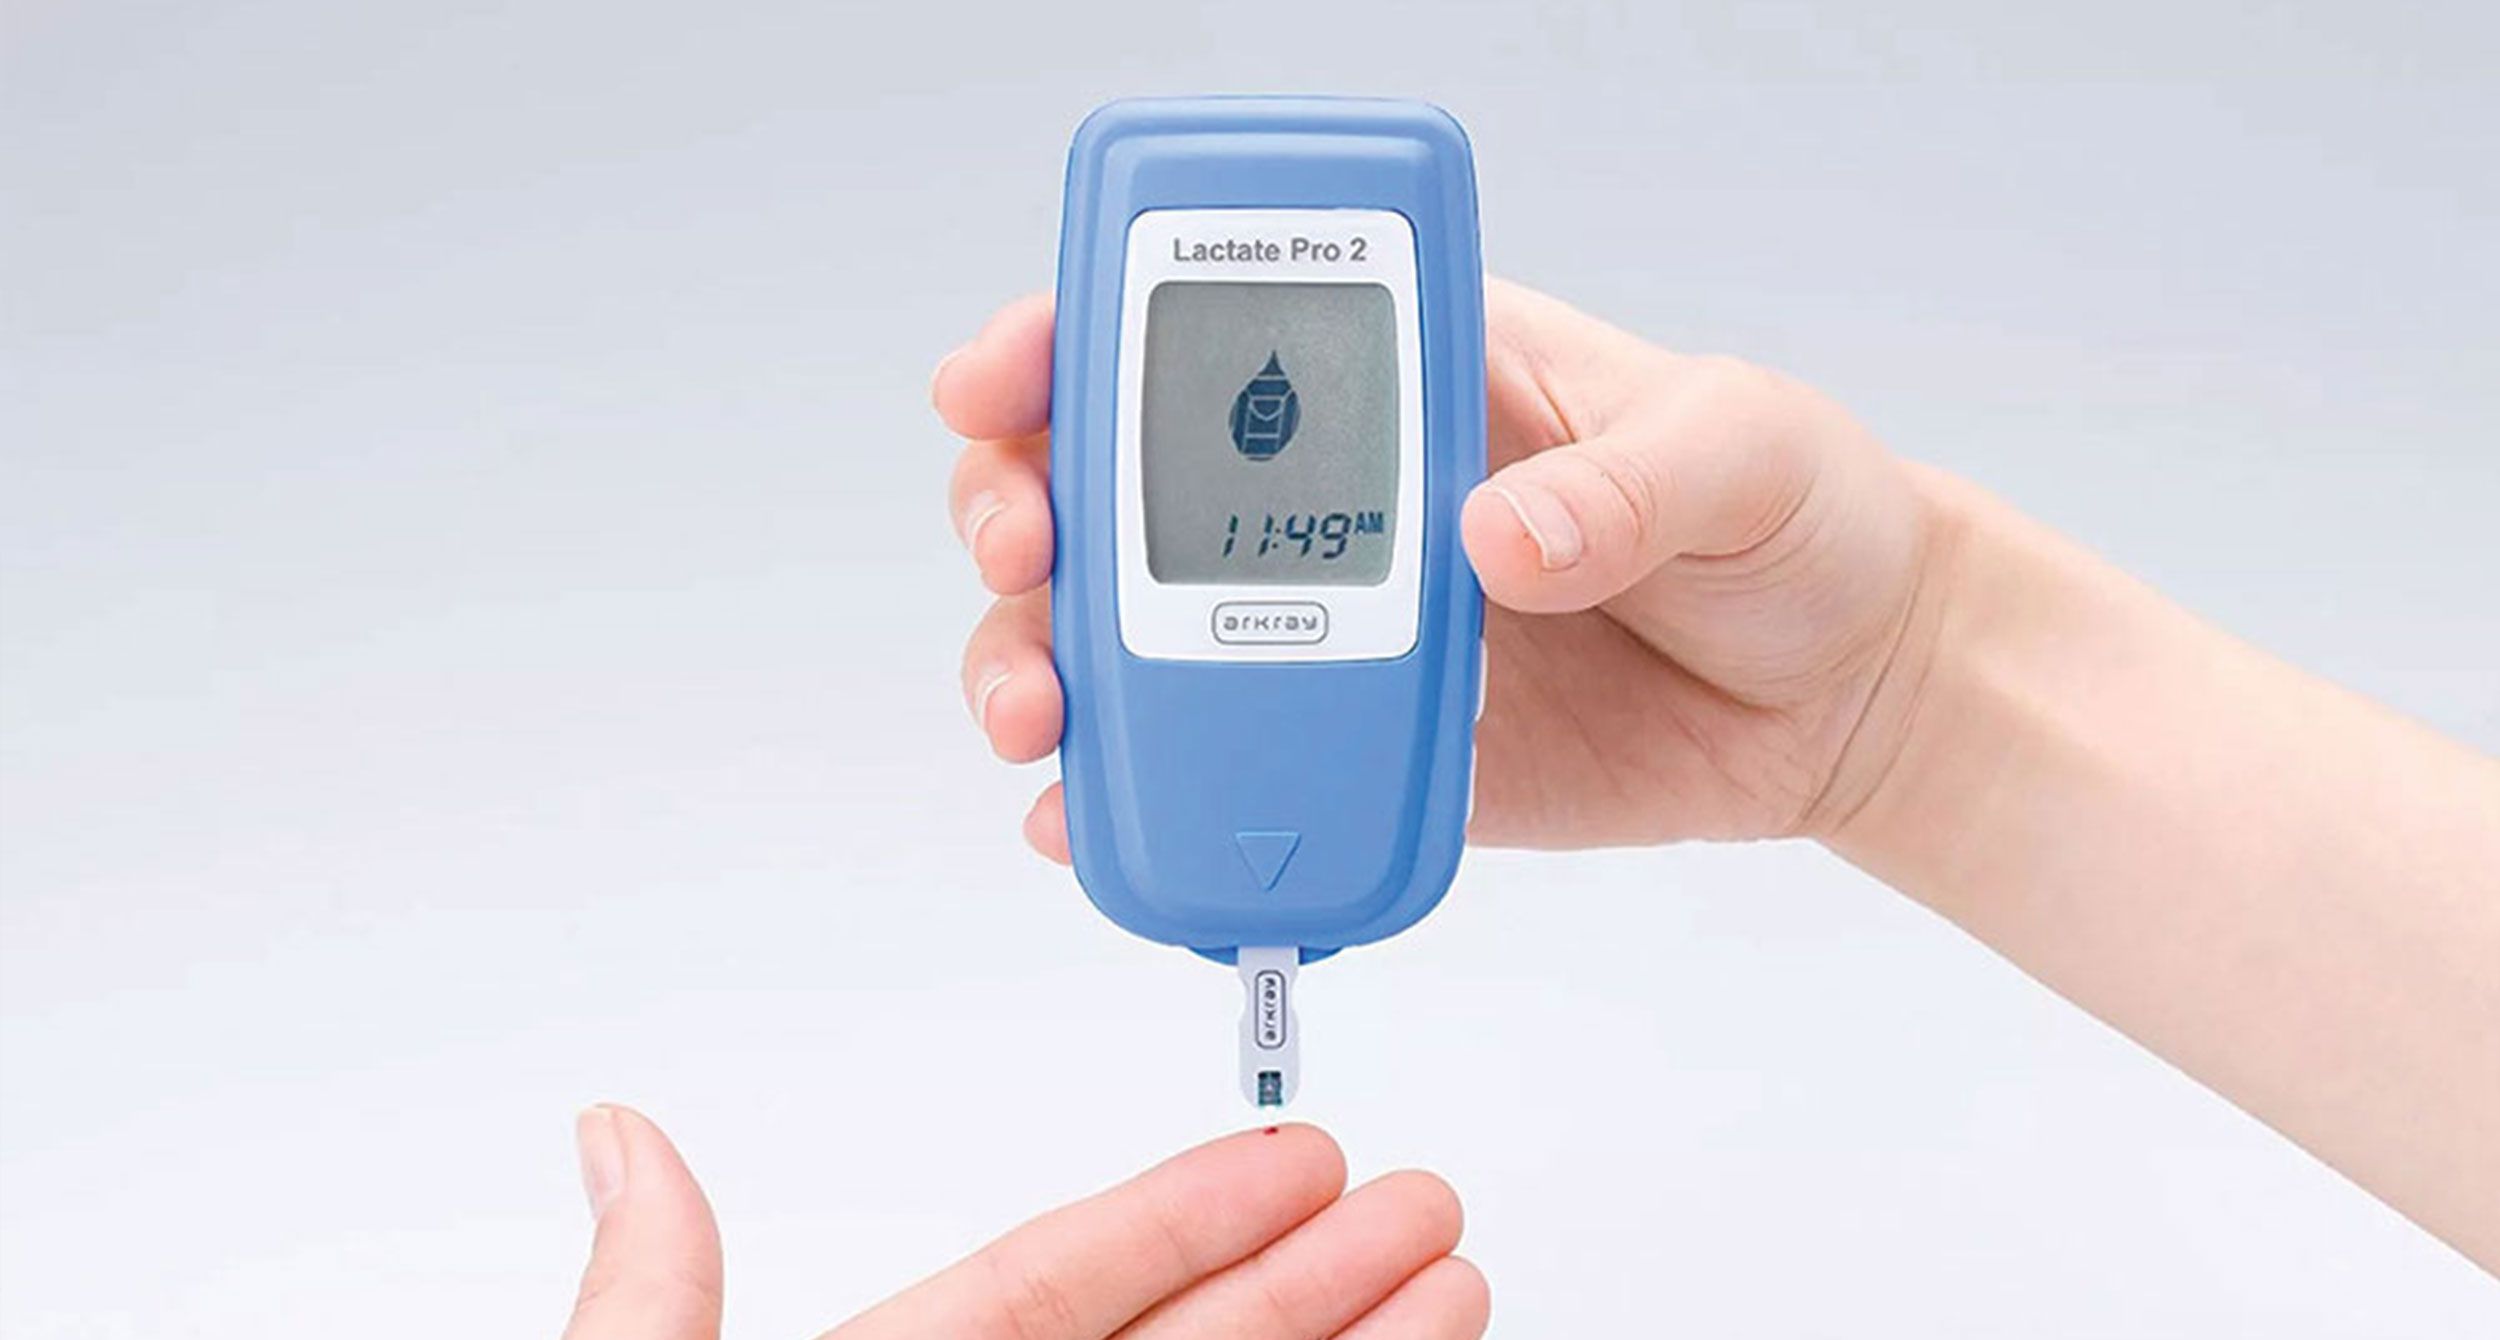 Lactate Pro 2 The new generation of portable, easy to use and fast blood lactate test meters